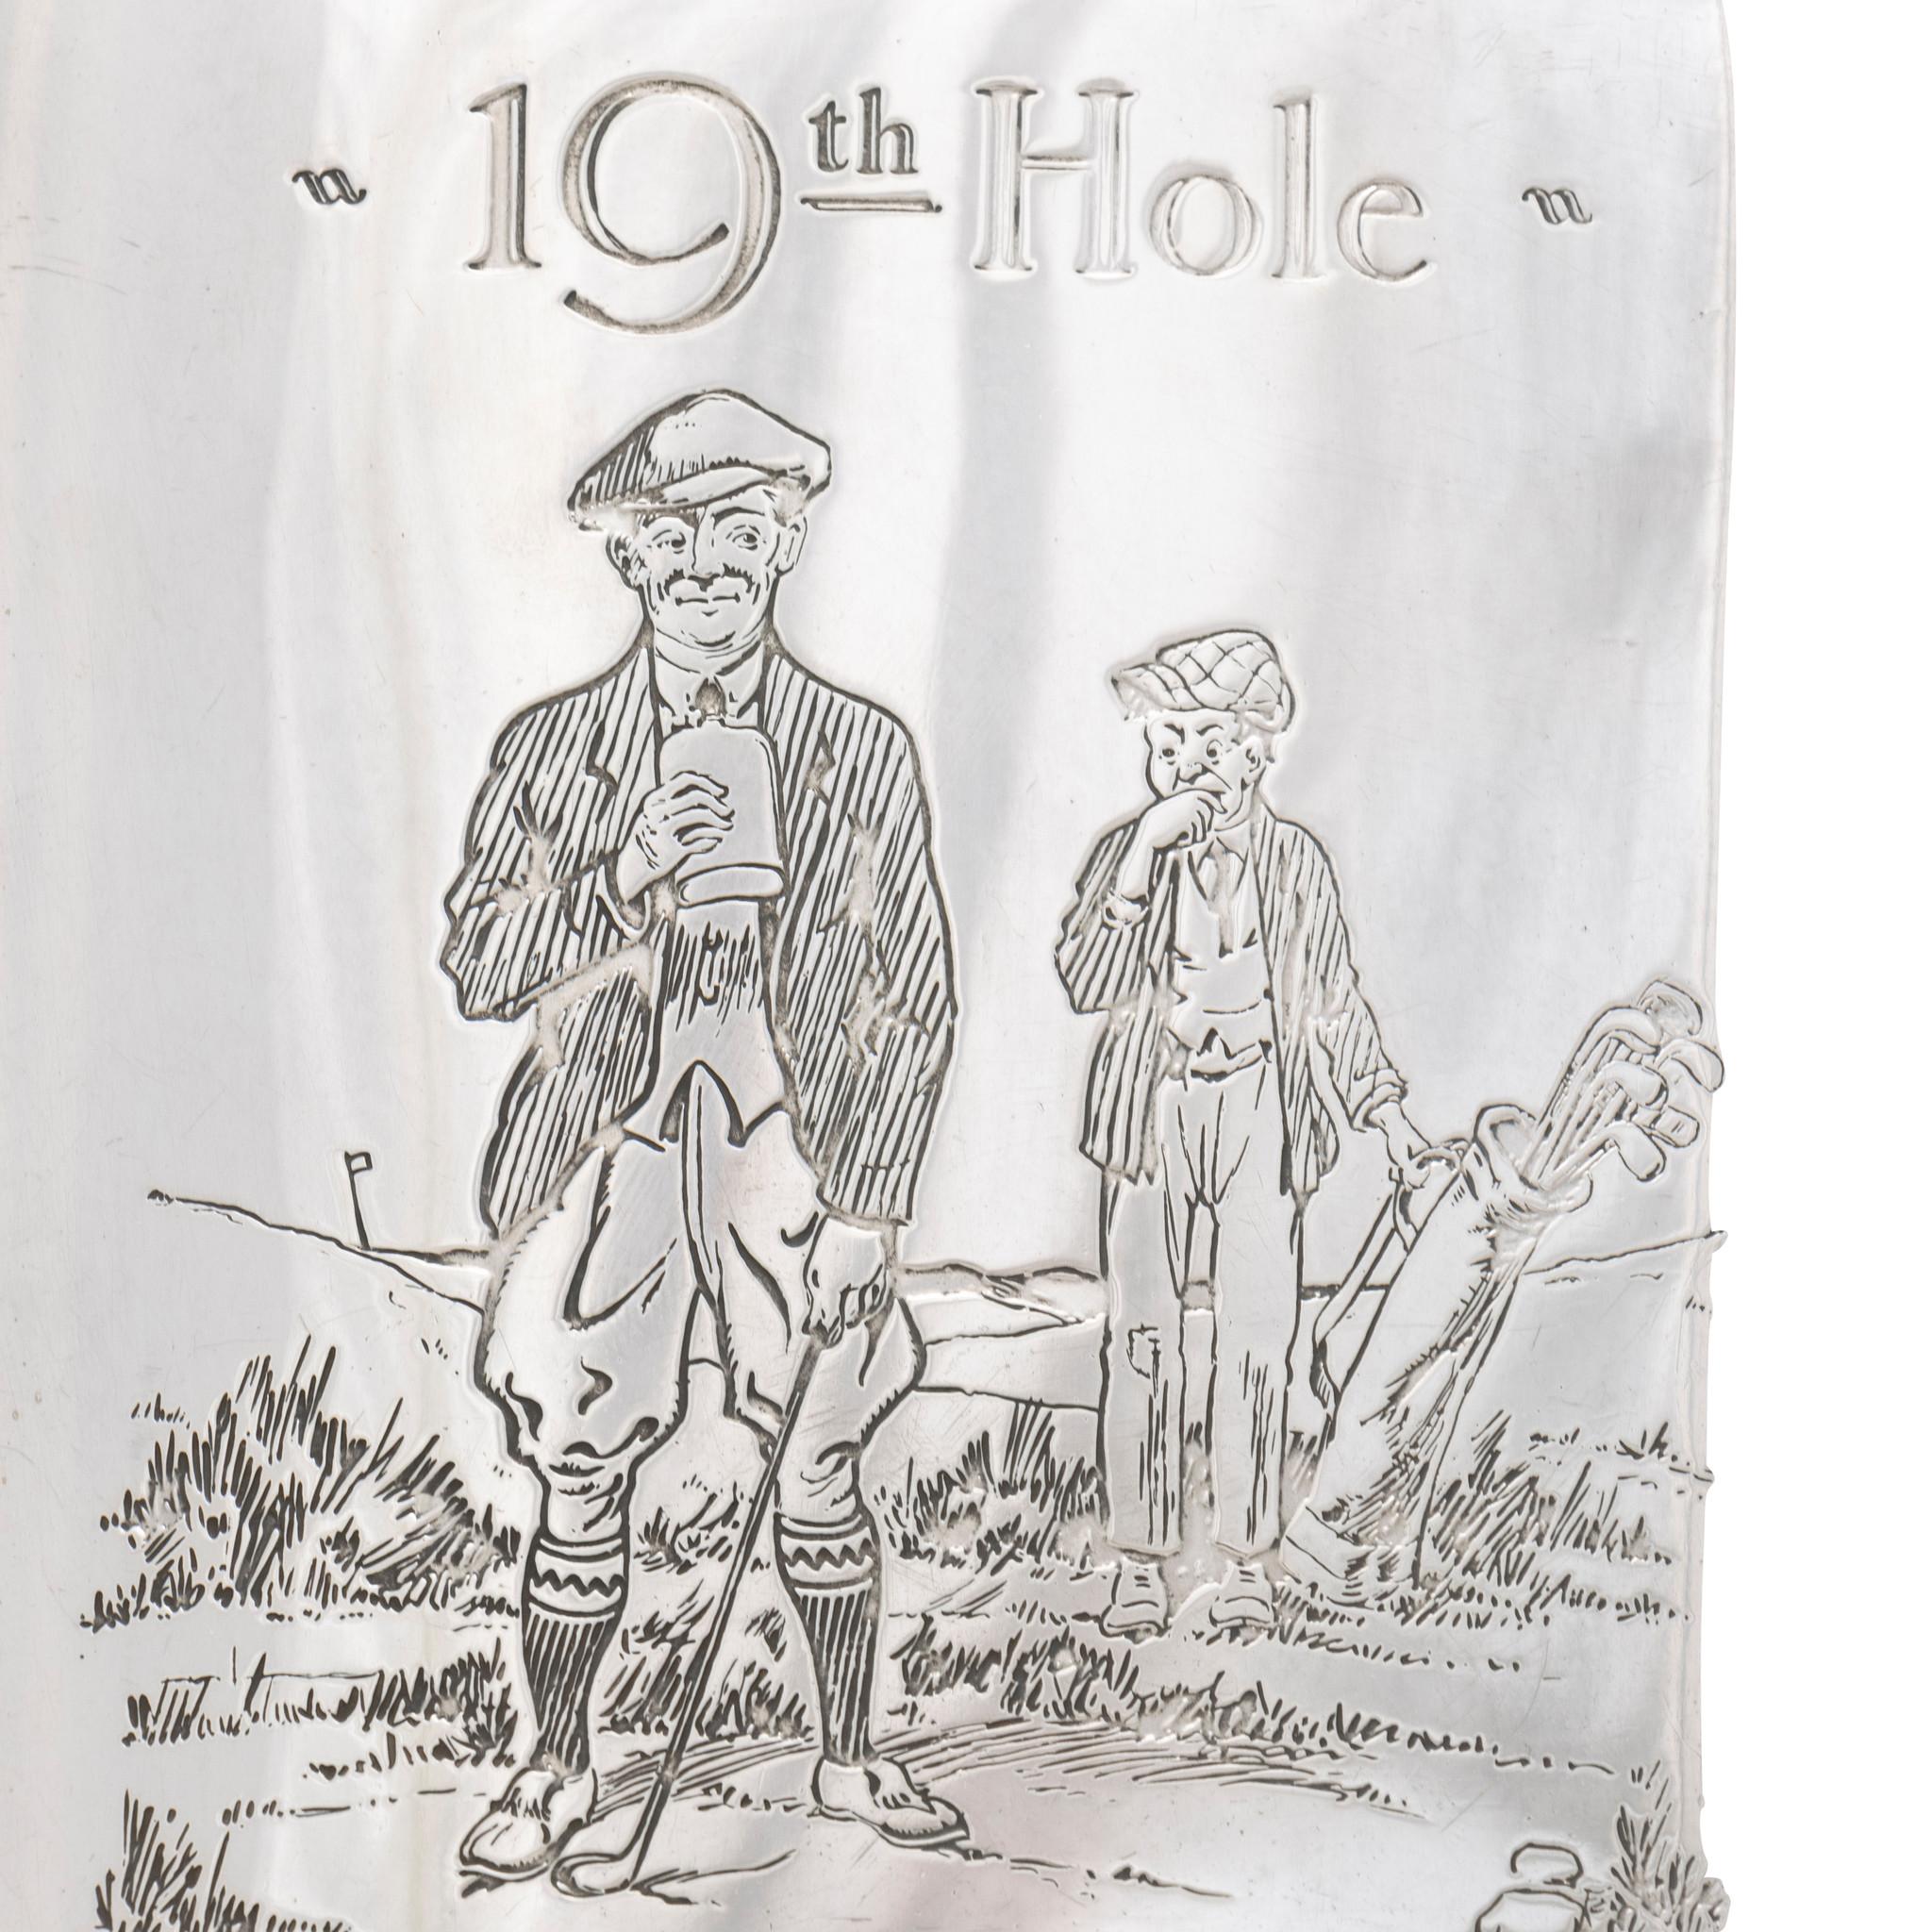 American novelty sterling silver golf themed flask by William B. Kerr. Engraved 